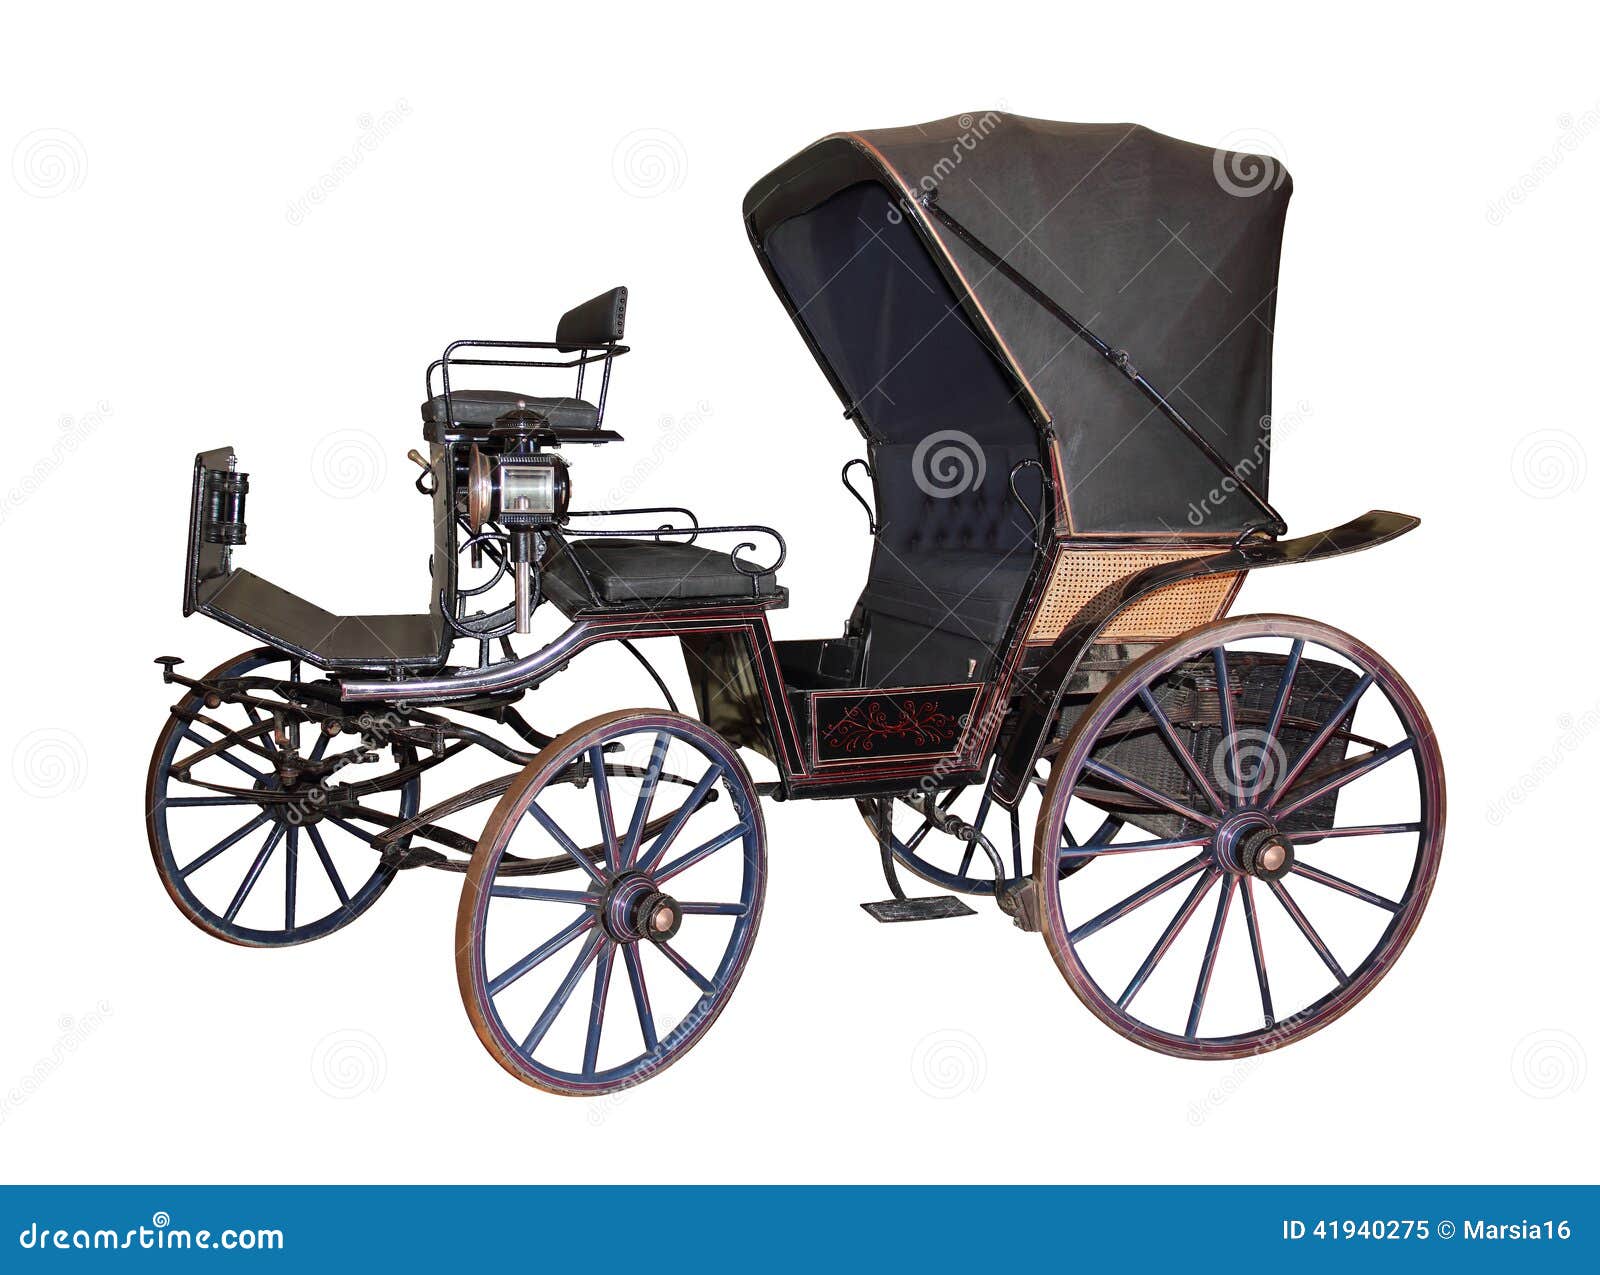 carriage by late 19th century on white